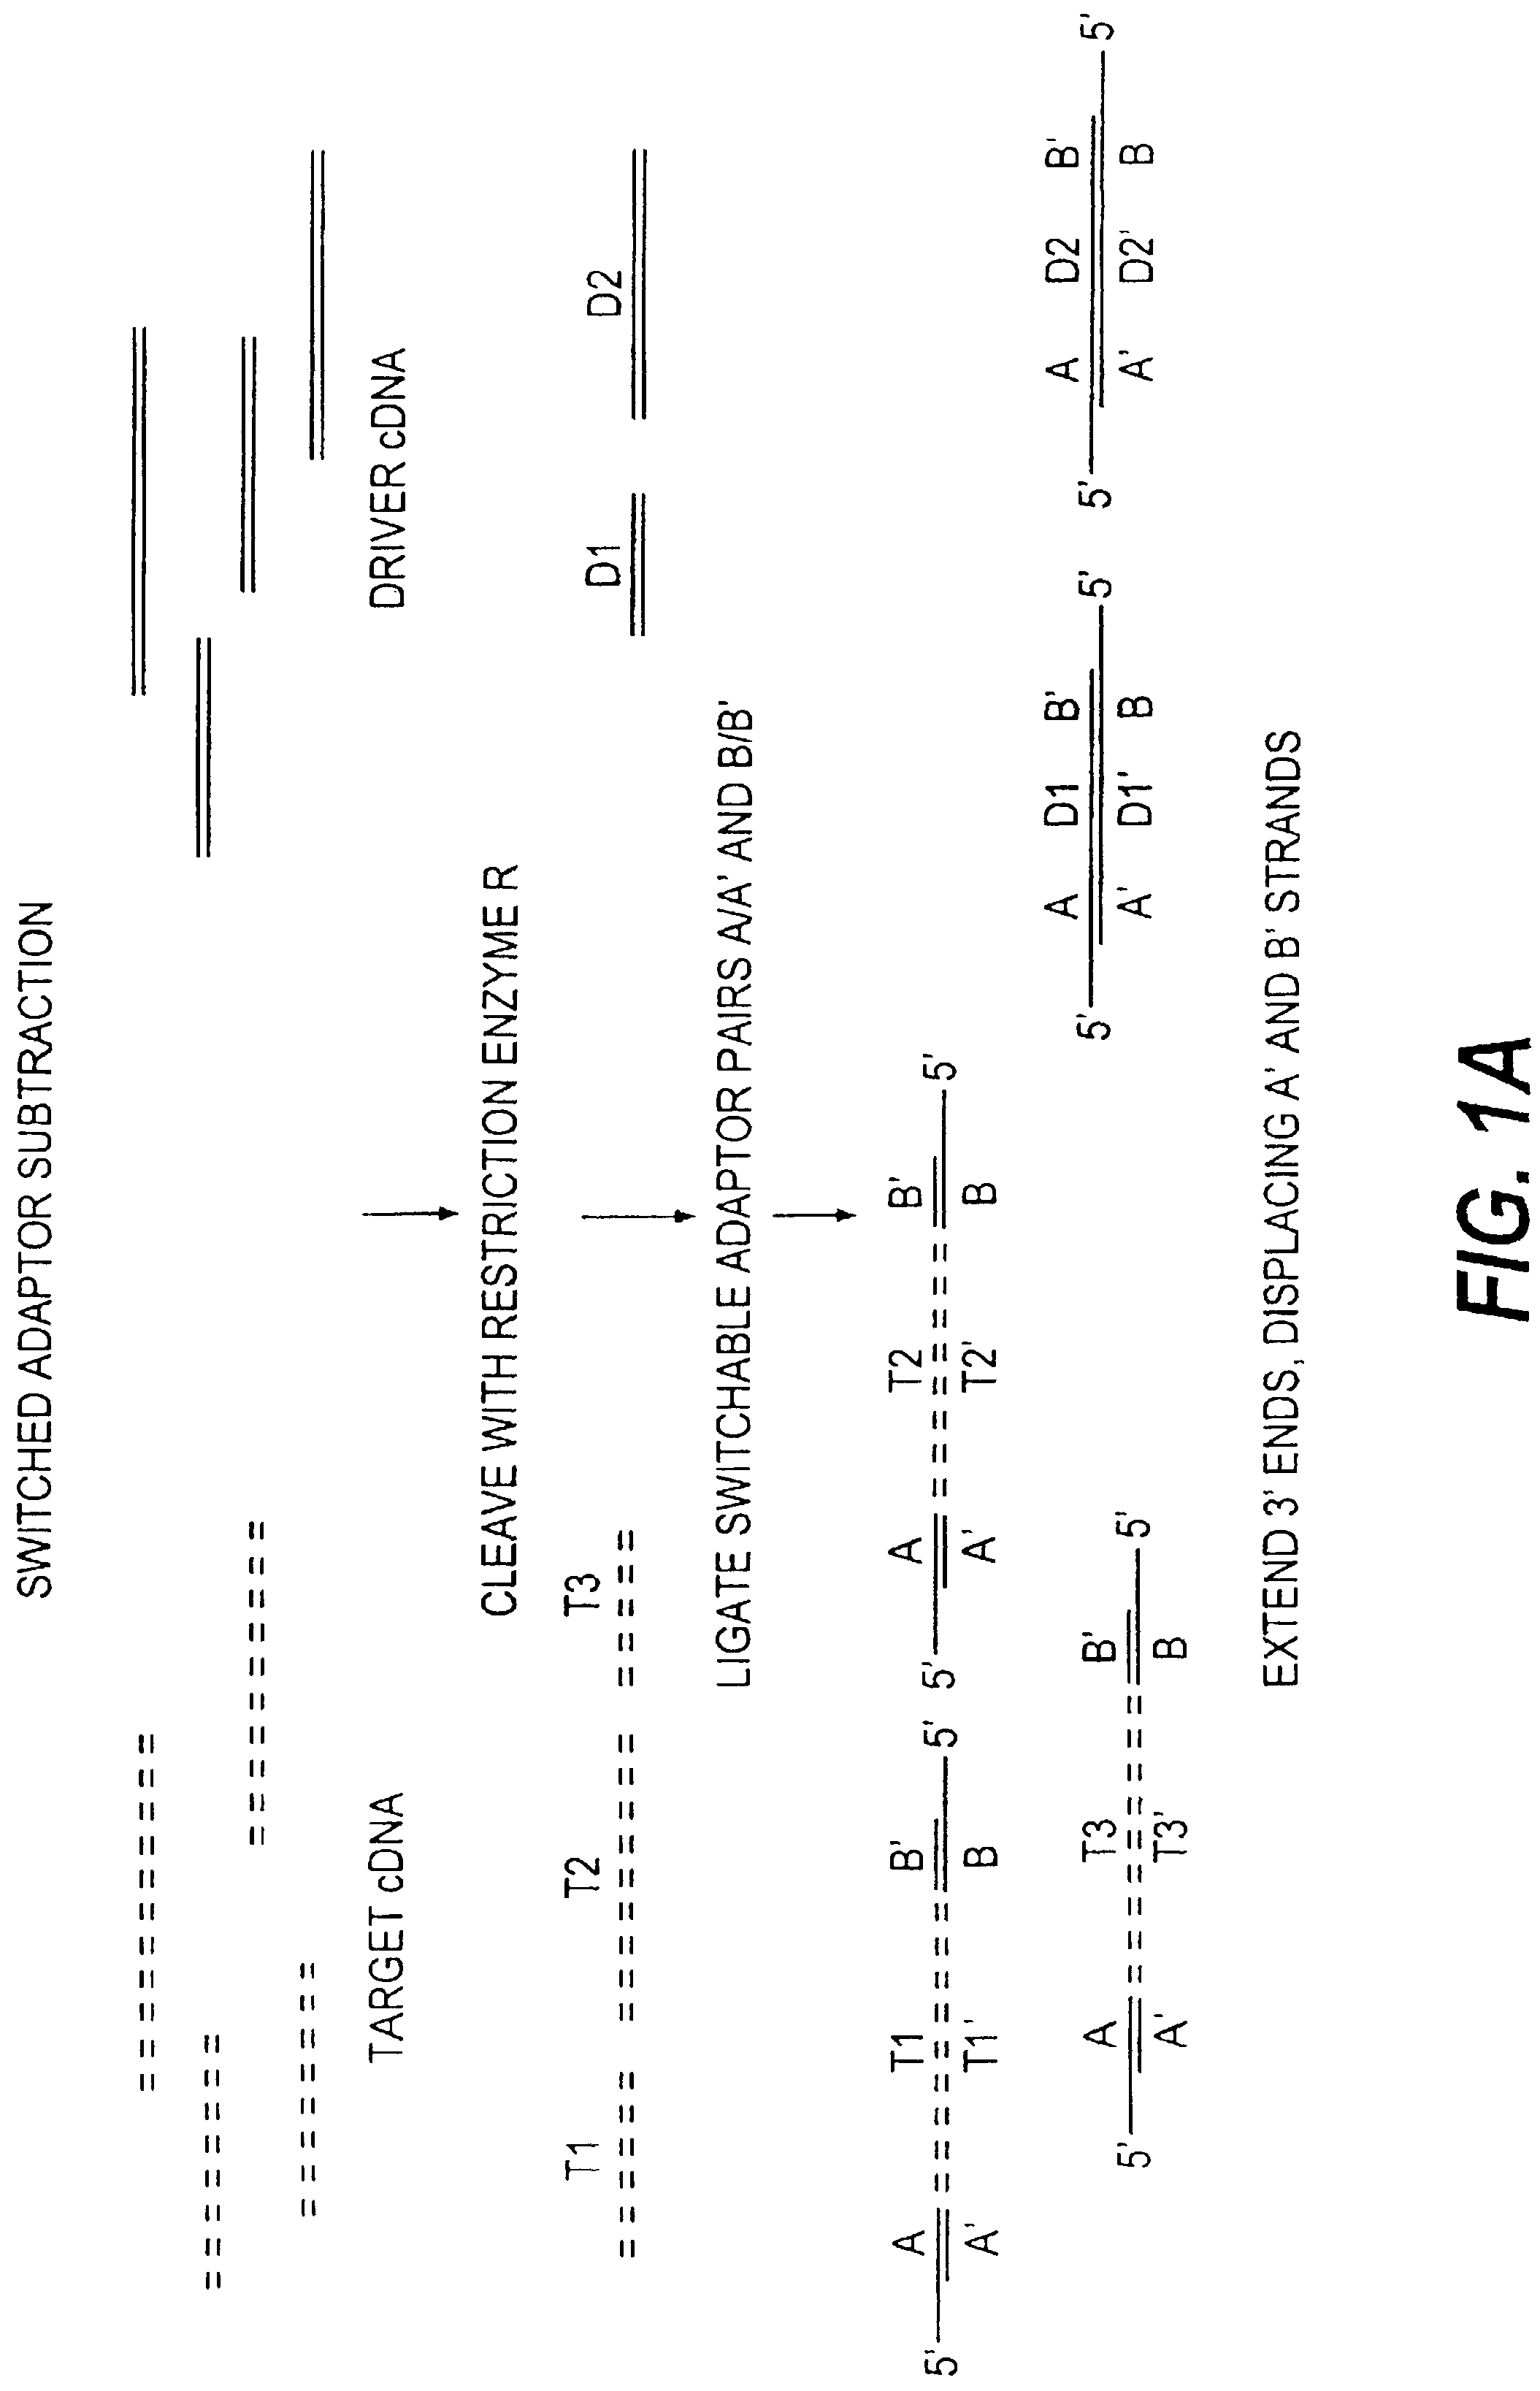 Method of target enrichment and amplification